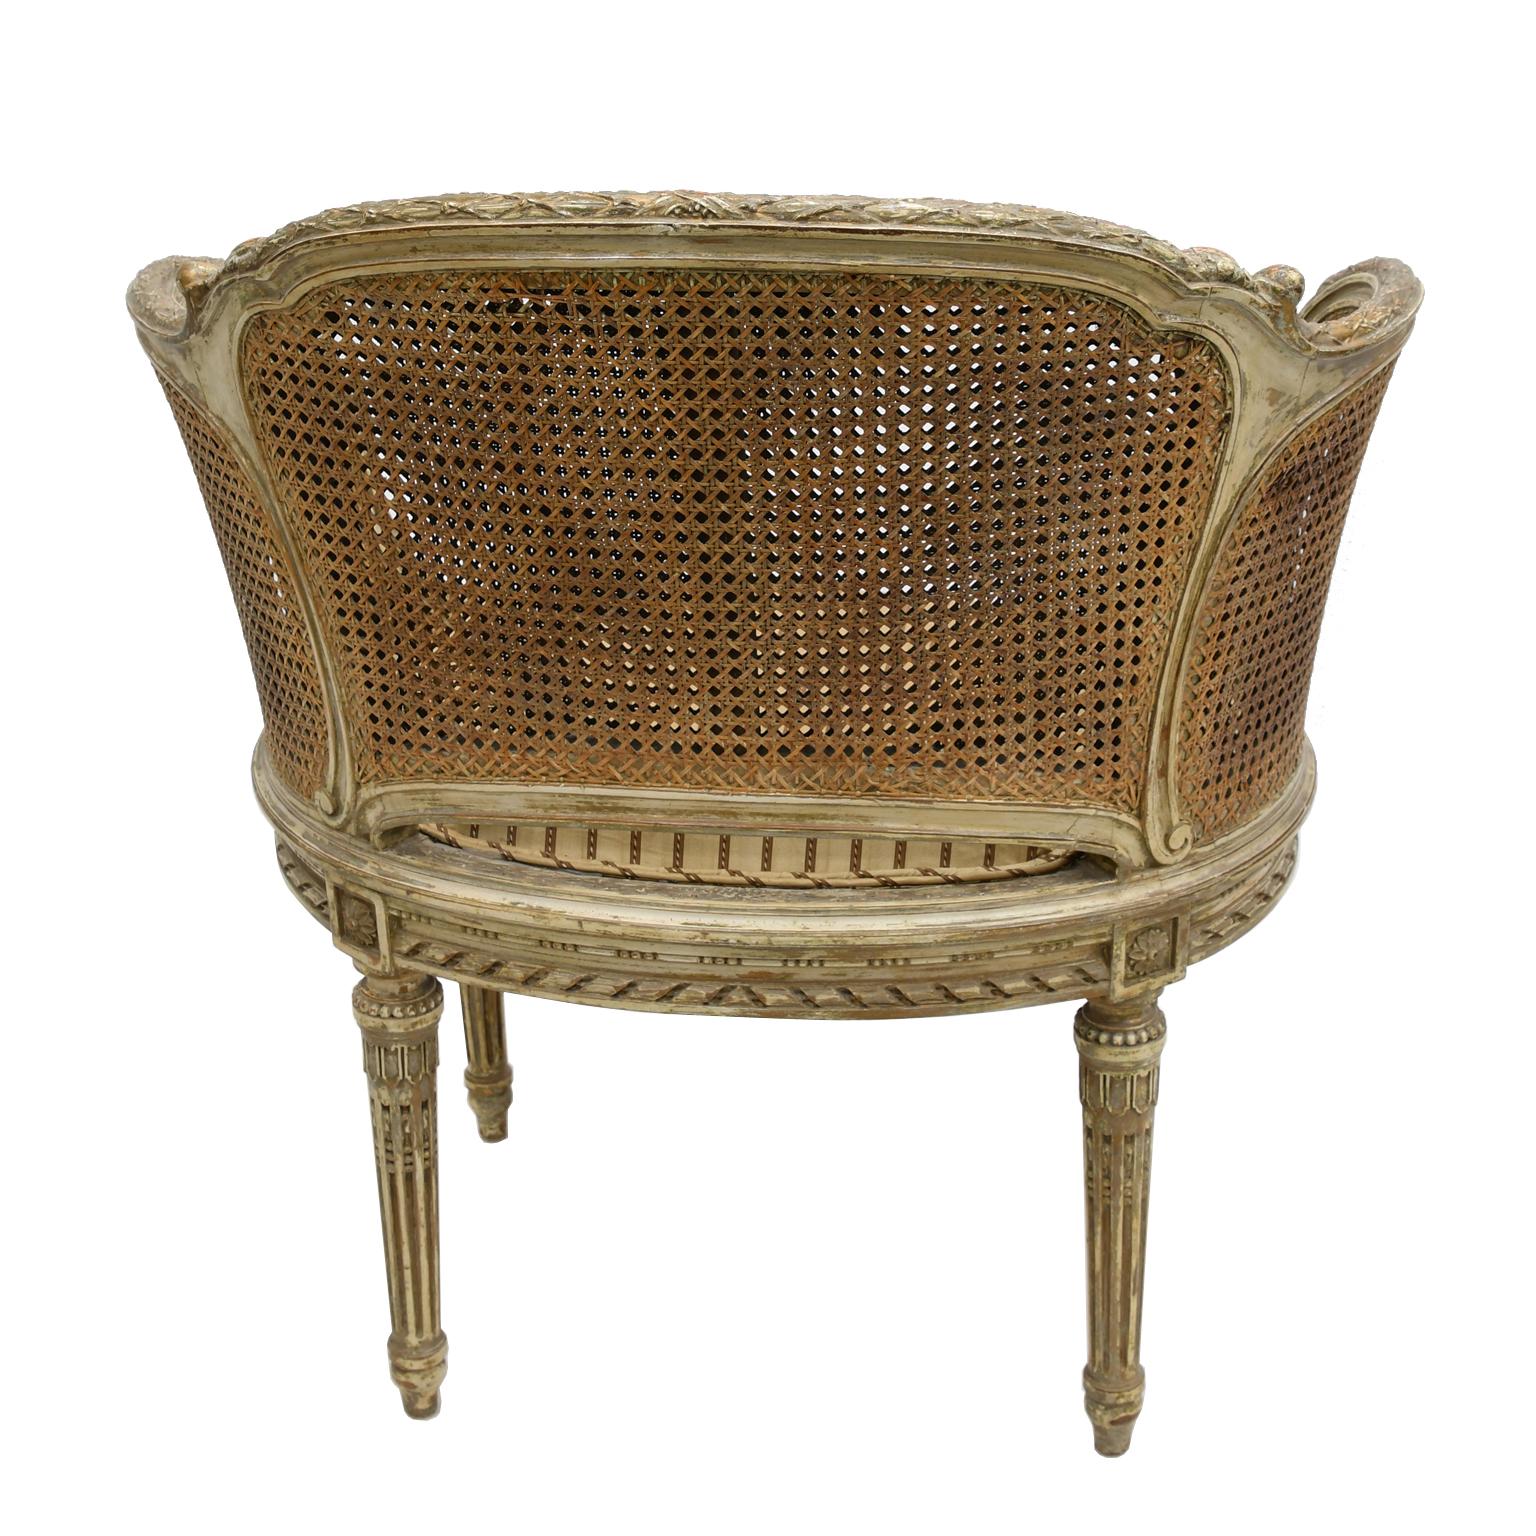 19th Century Antique French Louis XVI Style Polychrome and Gilt Barrel Desk Chair with Caning